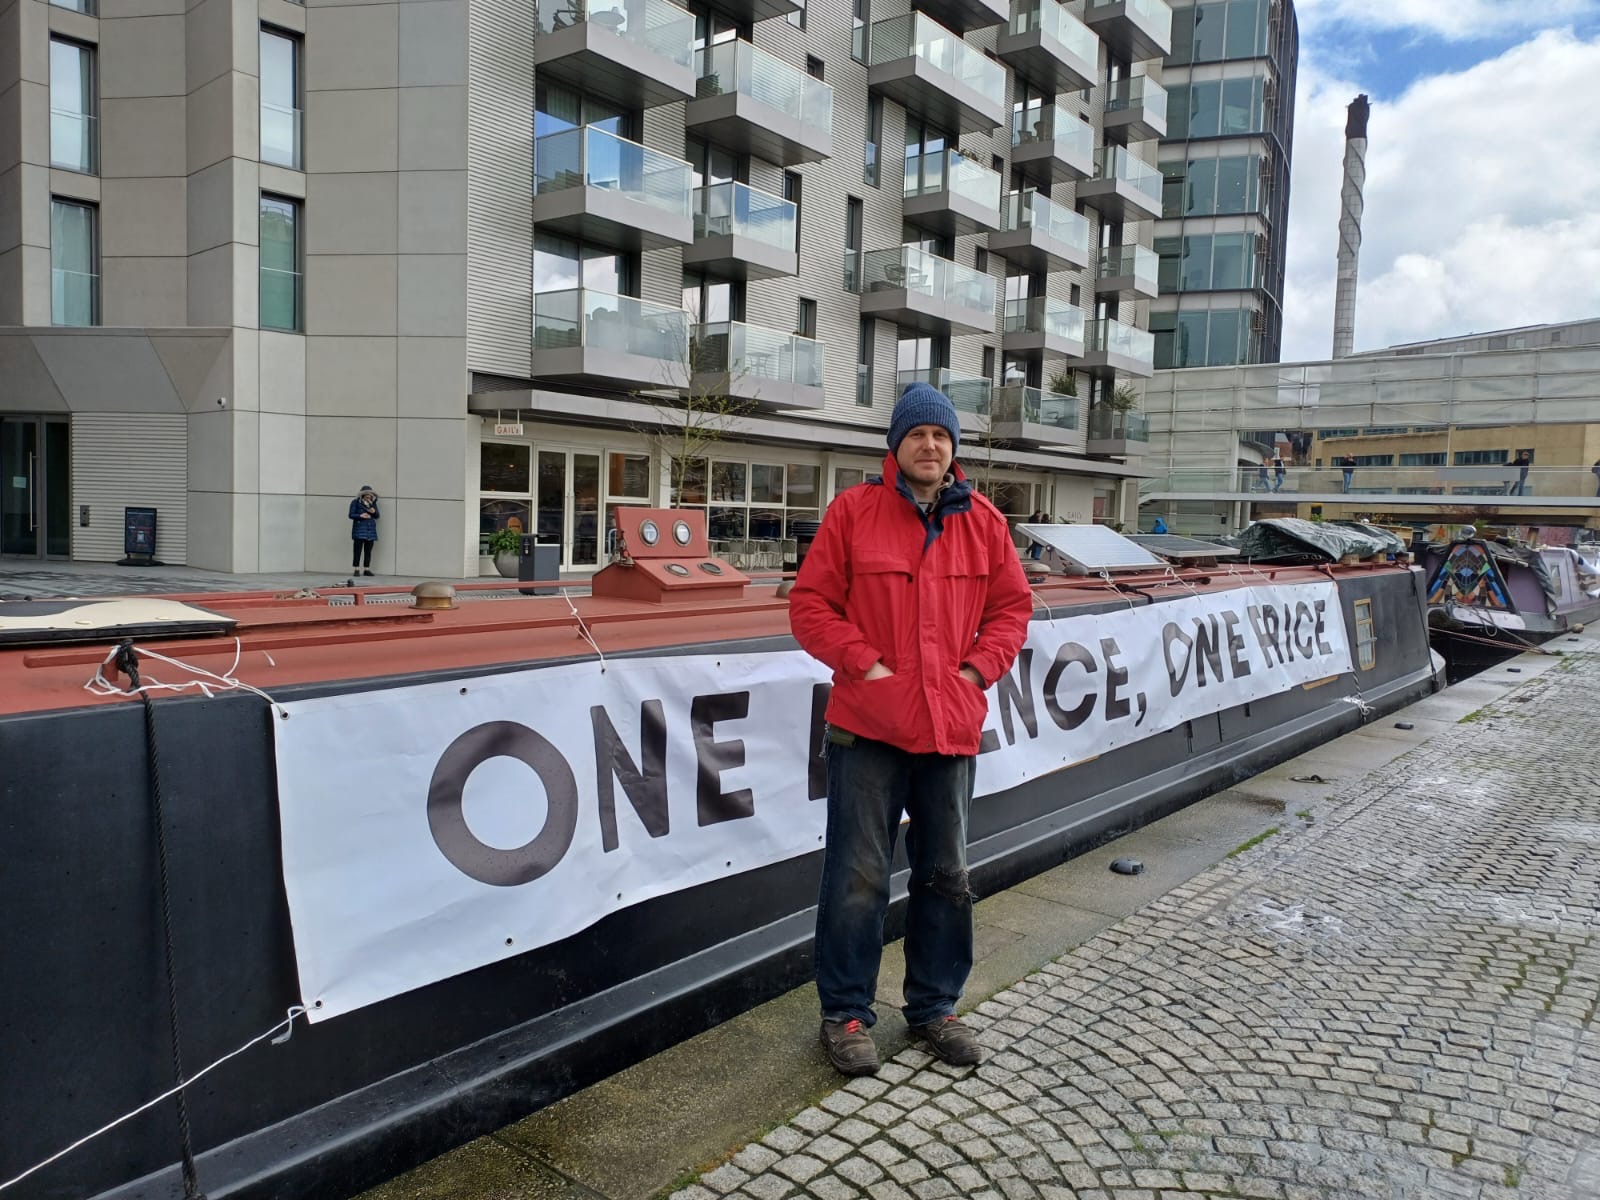 Boaters to stage protest over ‘discriminatory’ price rises